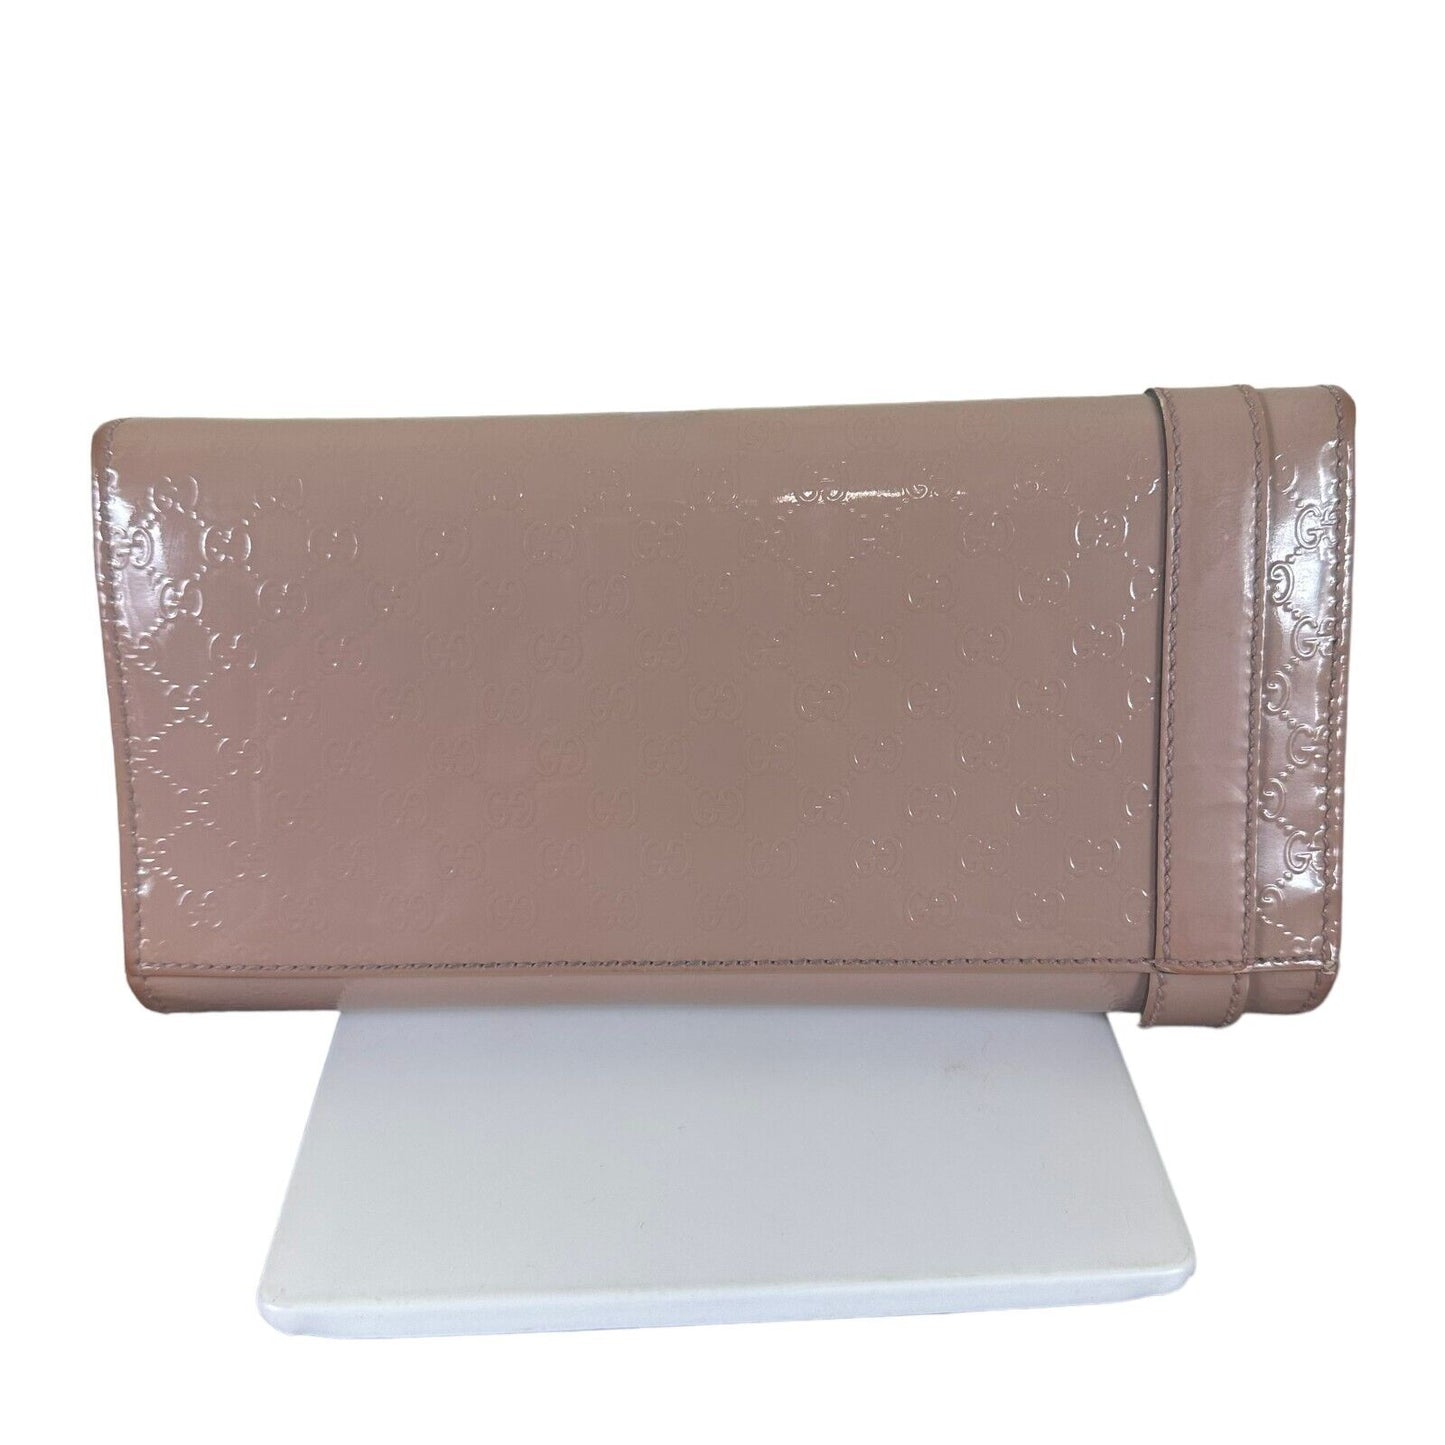 Gucci Micro Guccissima Nude Patent Leather Belt Design Long Wallet